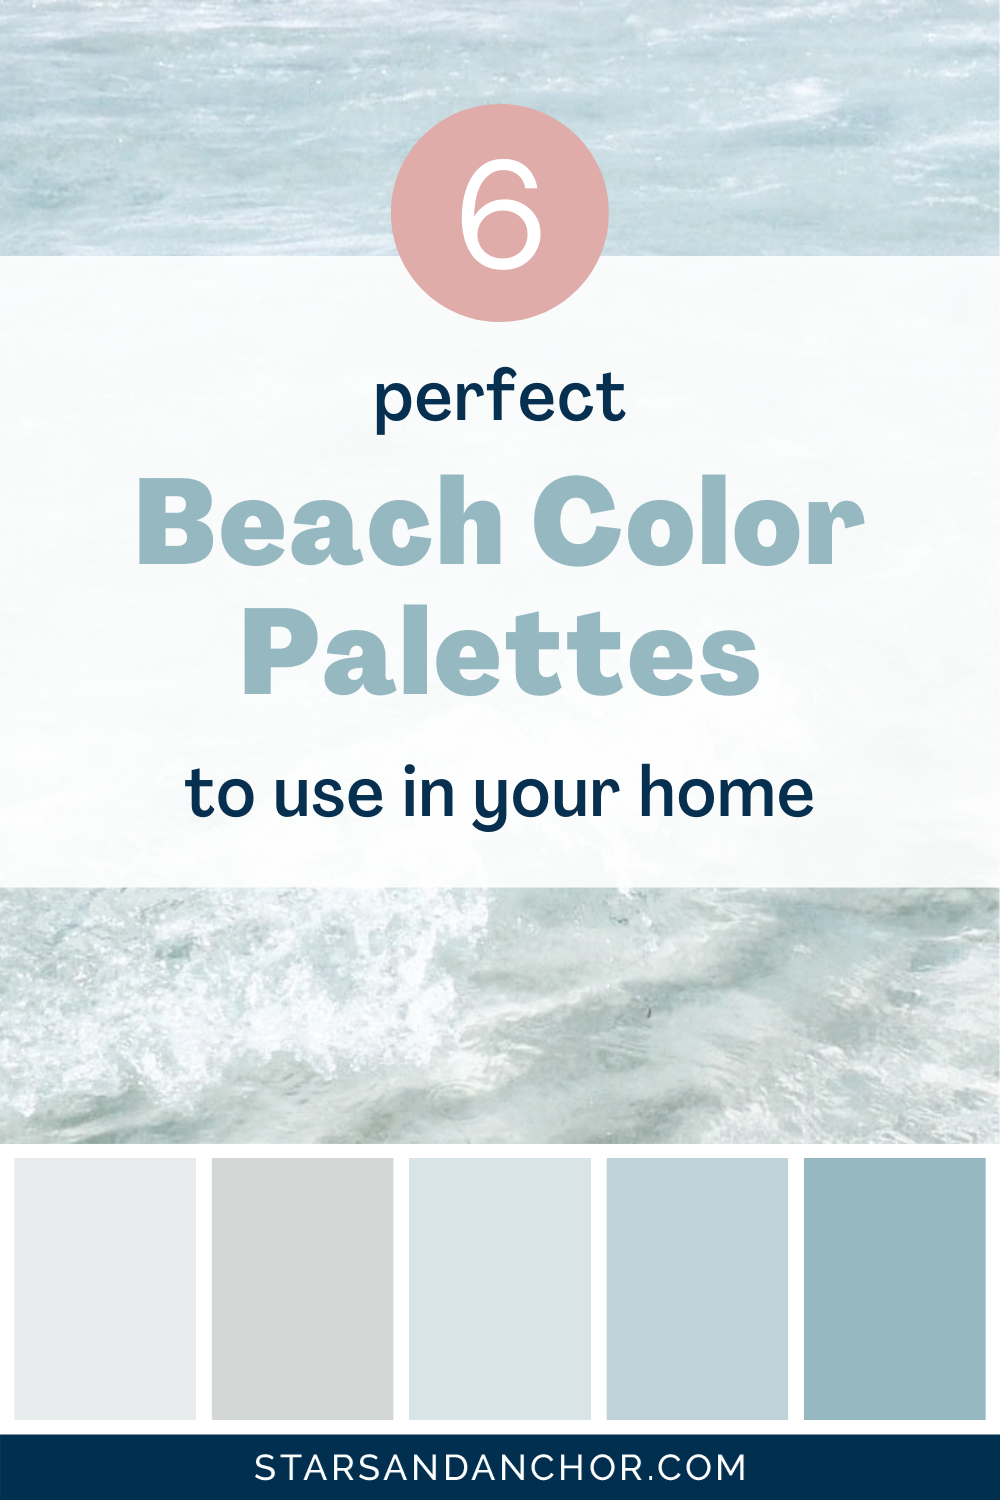 A graphic that reads, "6 perfect beach color palettes to use in your home, from Stars and Anchor dot com." It shows a picture of ocean water and has 5 color swatches underneath.